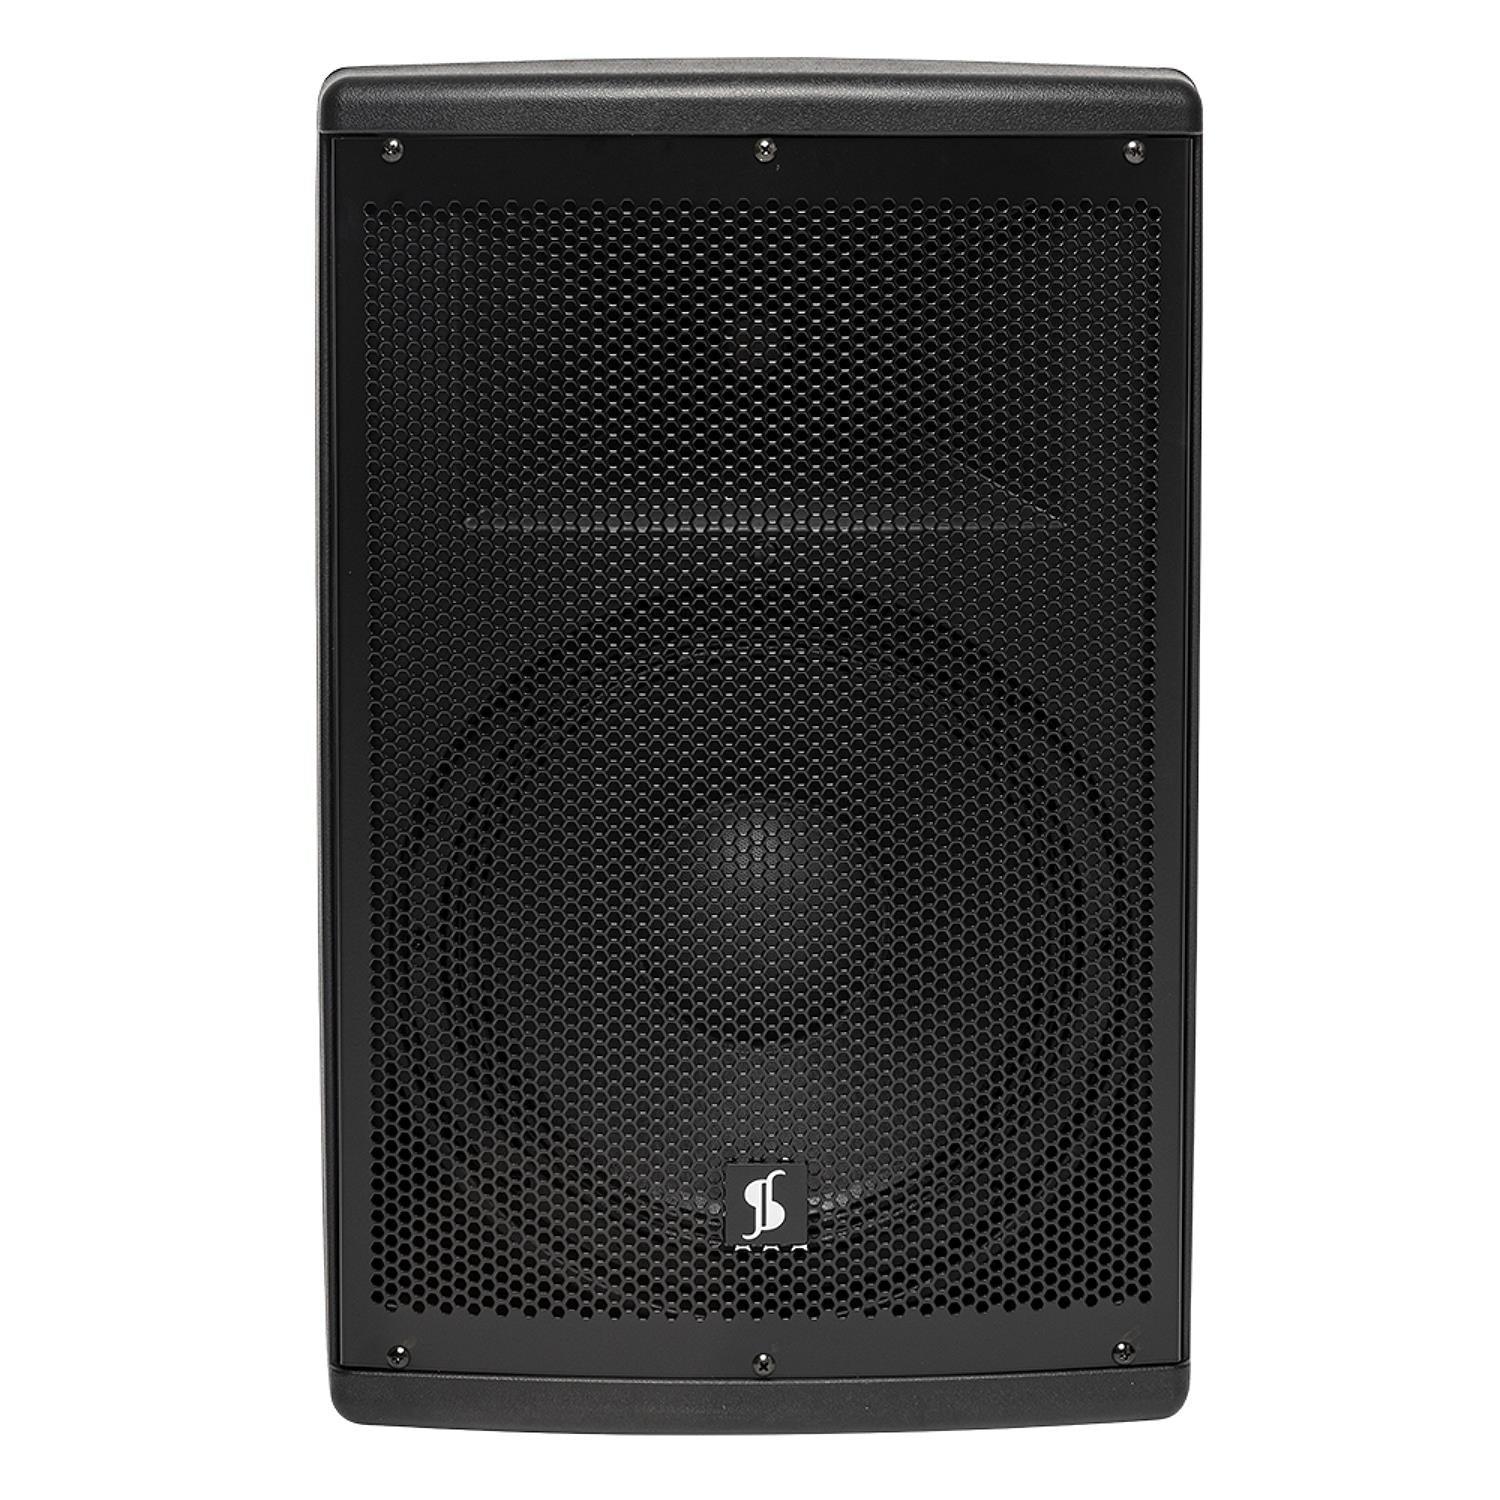 Stagg AS12 12" 300w Active Speaker with Bluetooth - DY Pro Audio